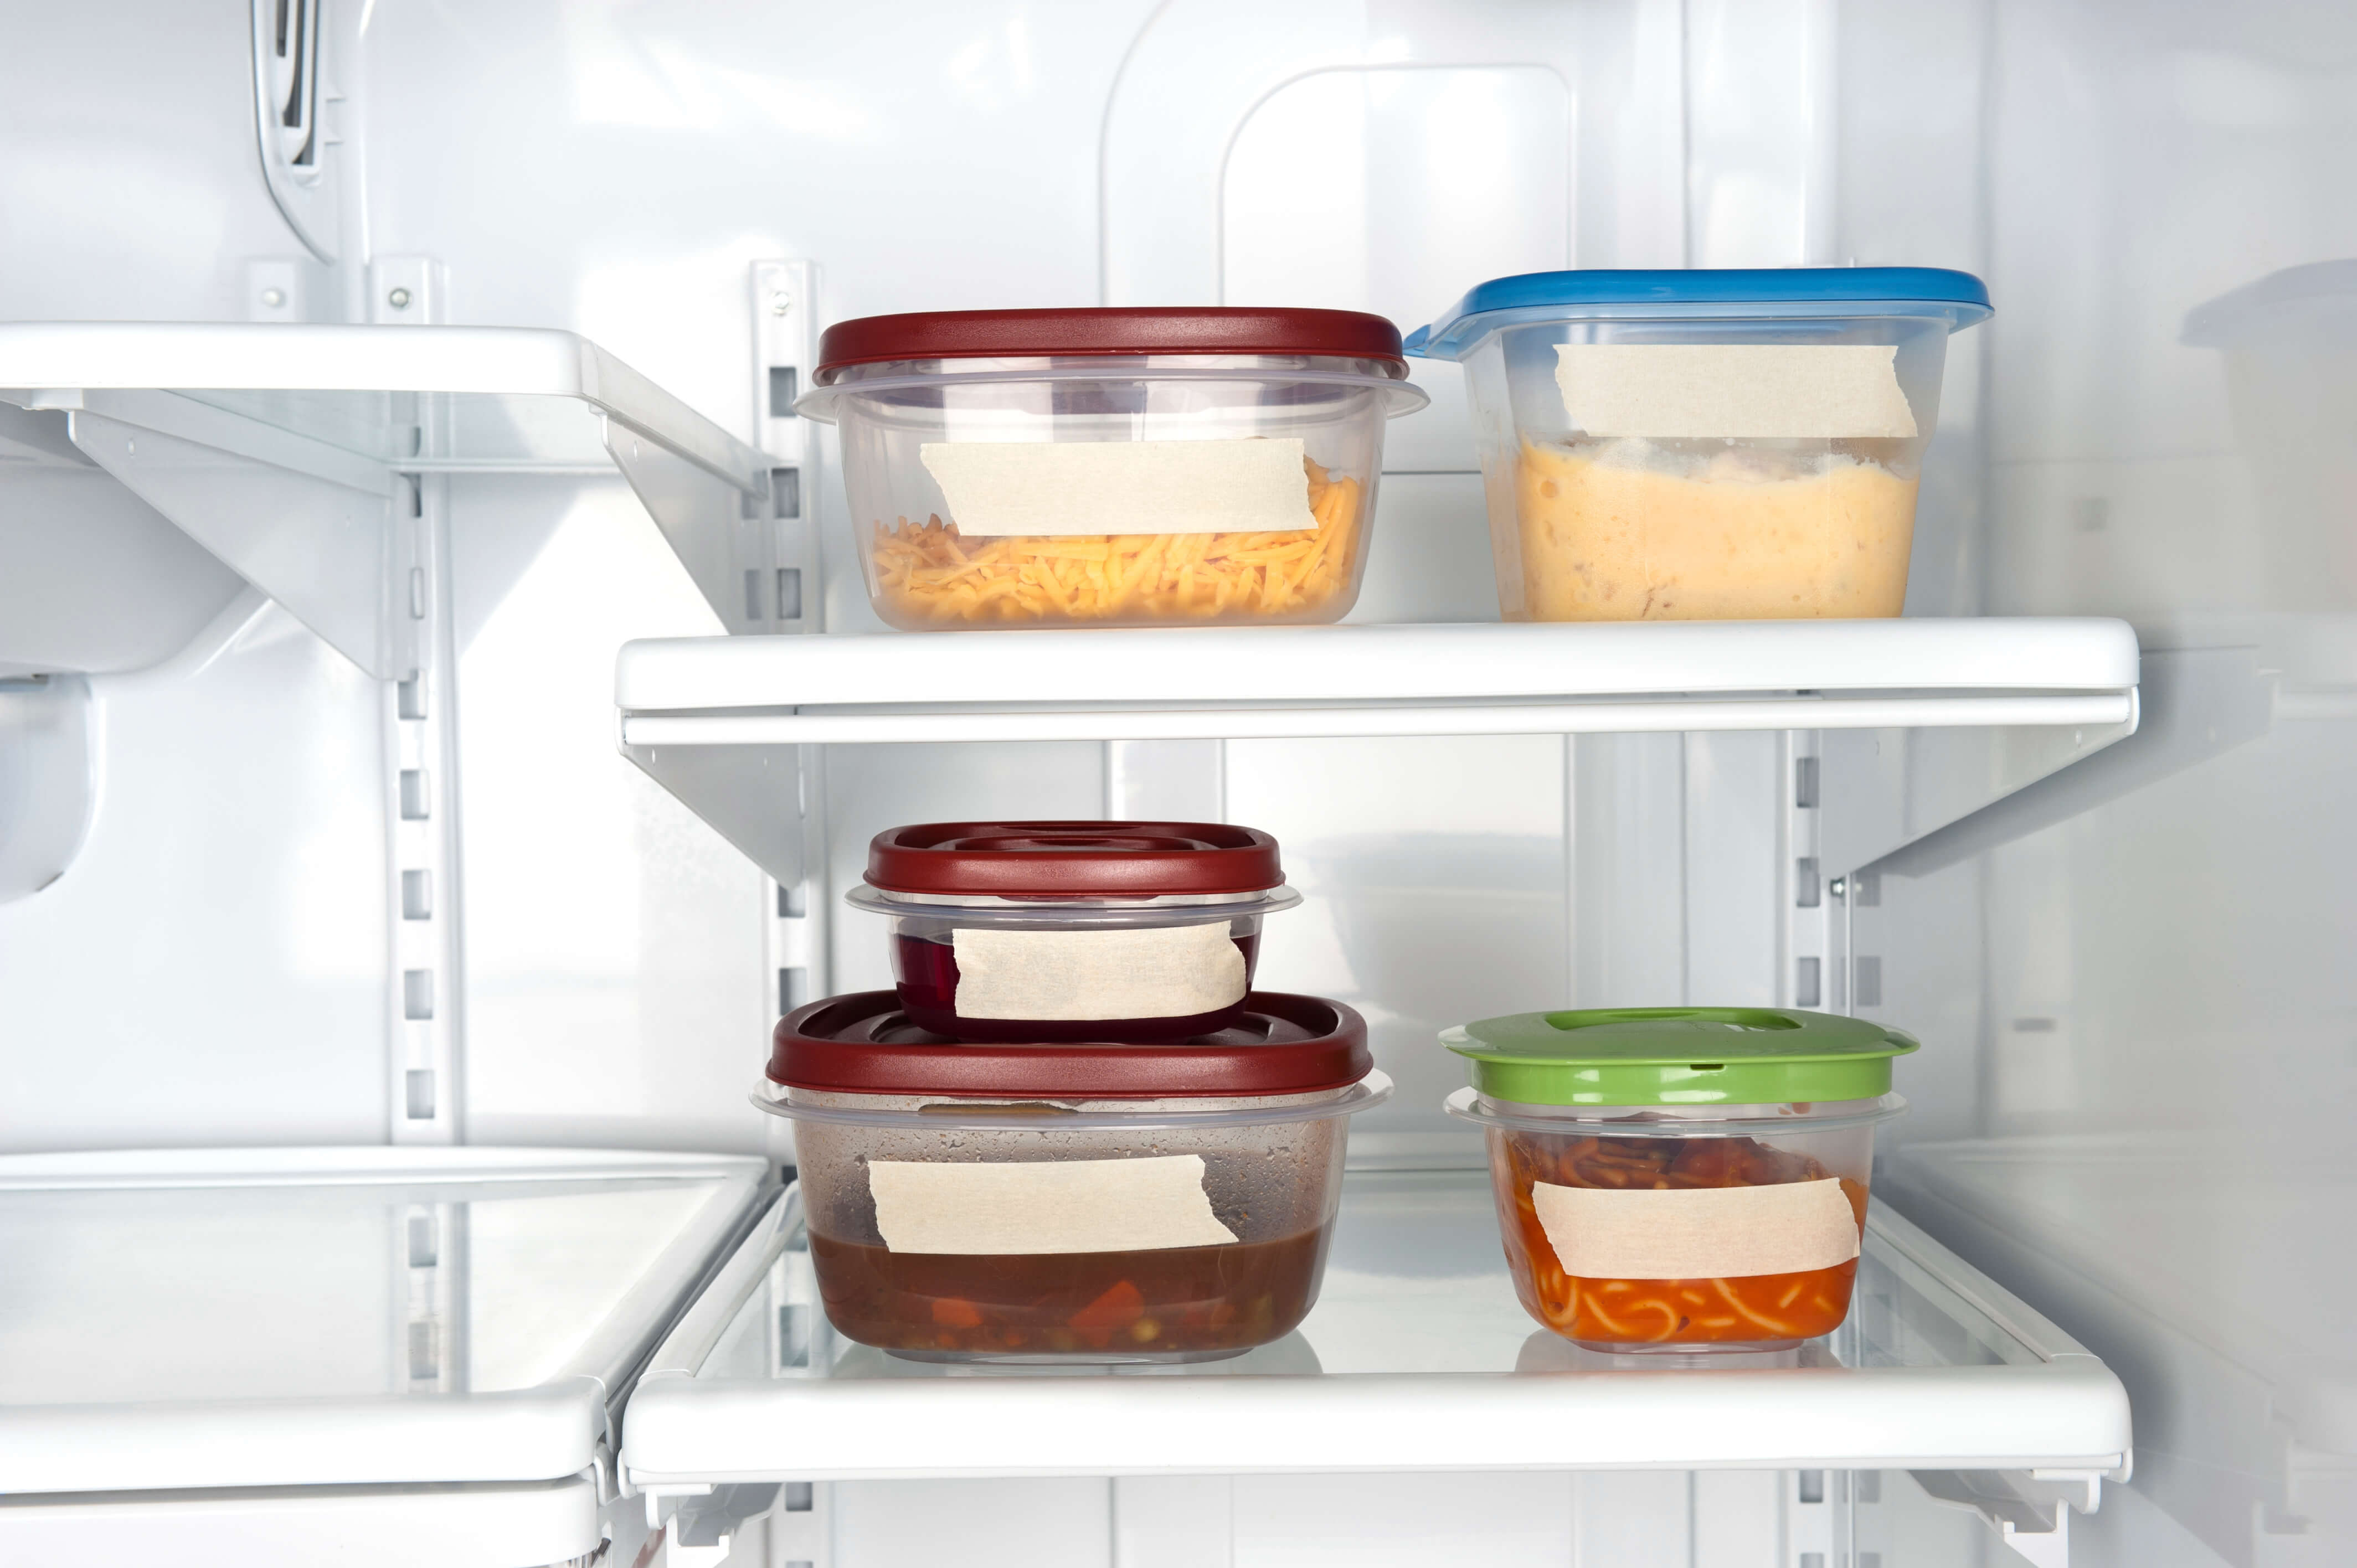 Proper food storage can extend food life for days and even weeks.